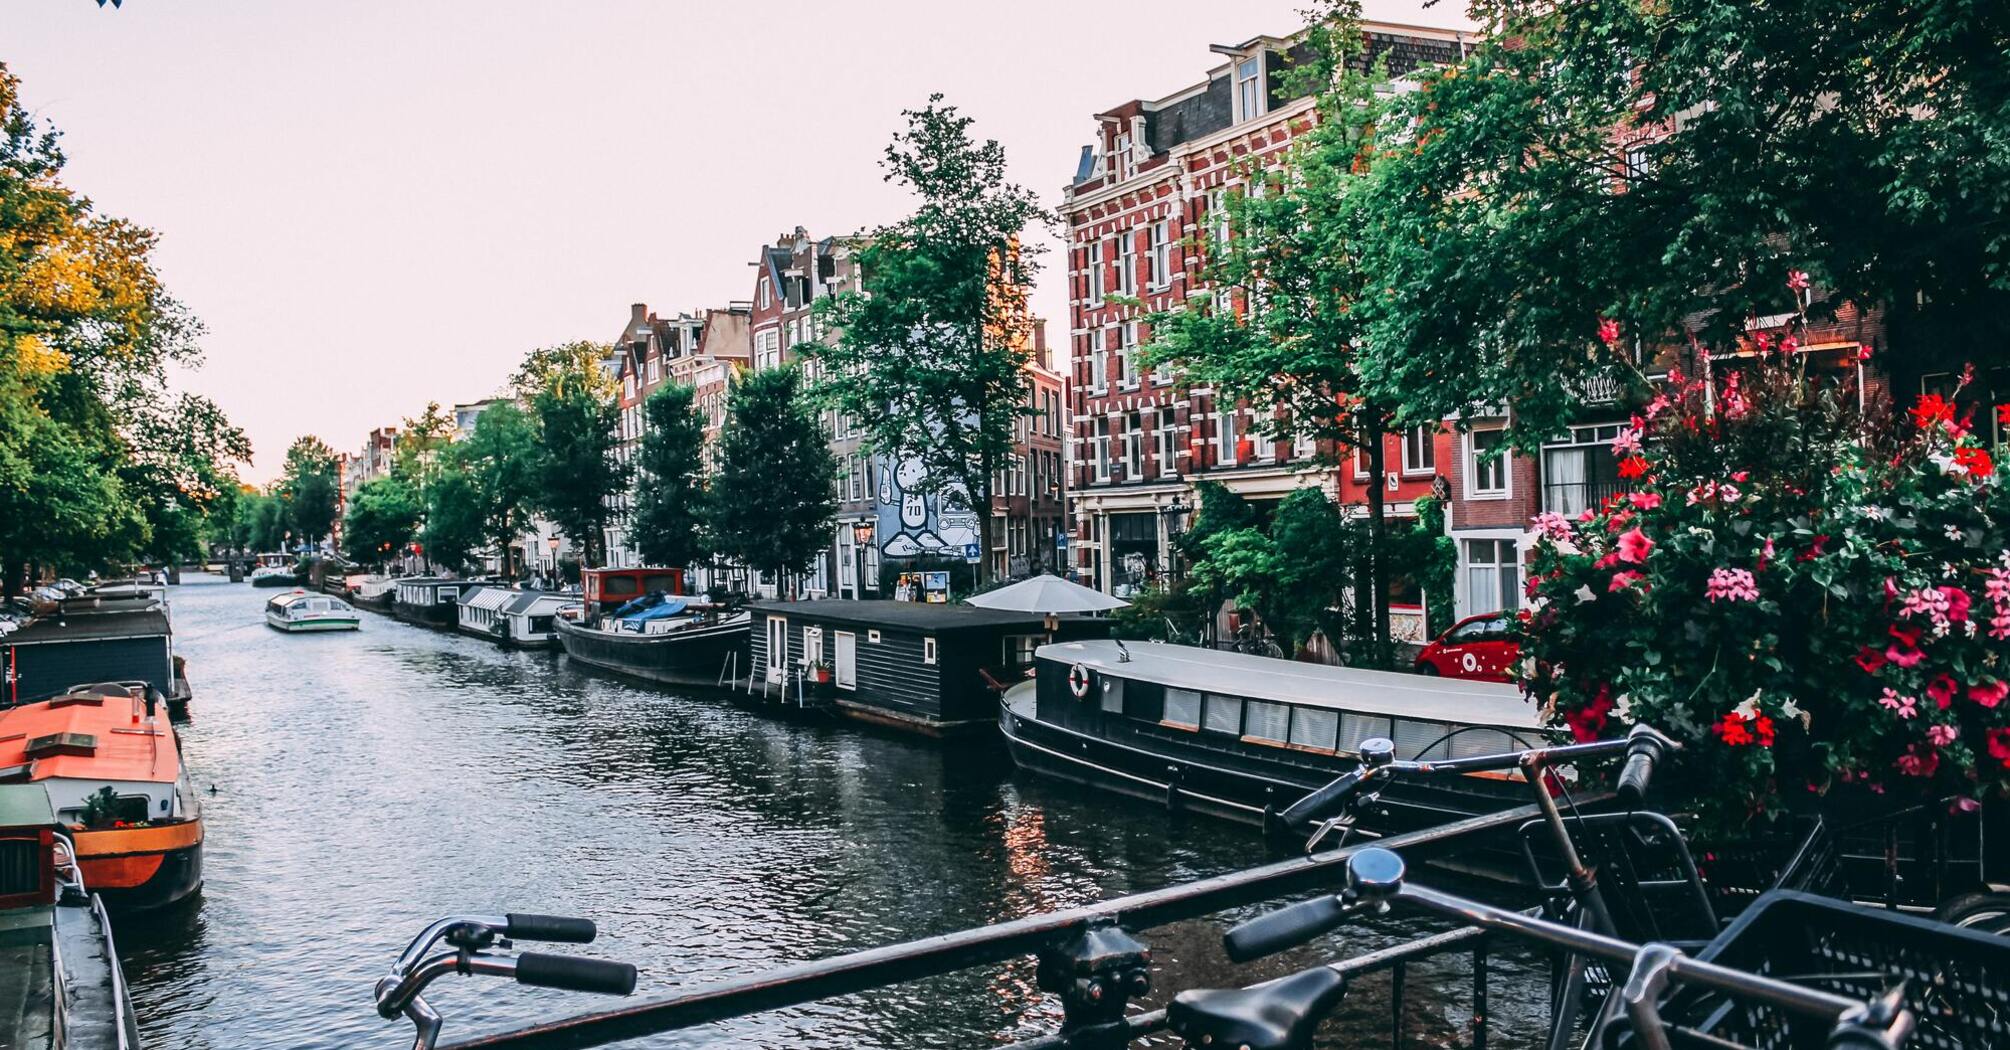 Best areas to stay in Amsterdam. Hotels, attractions and things to do